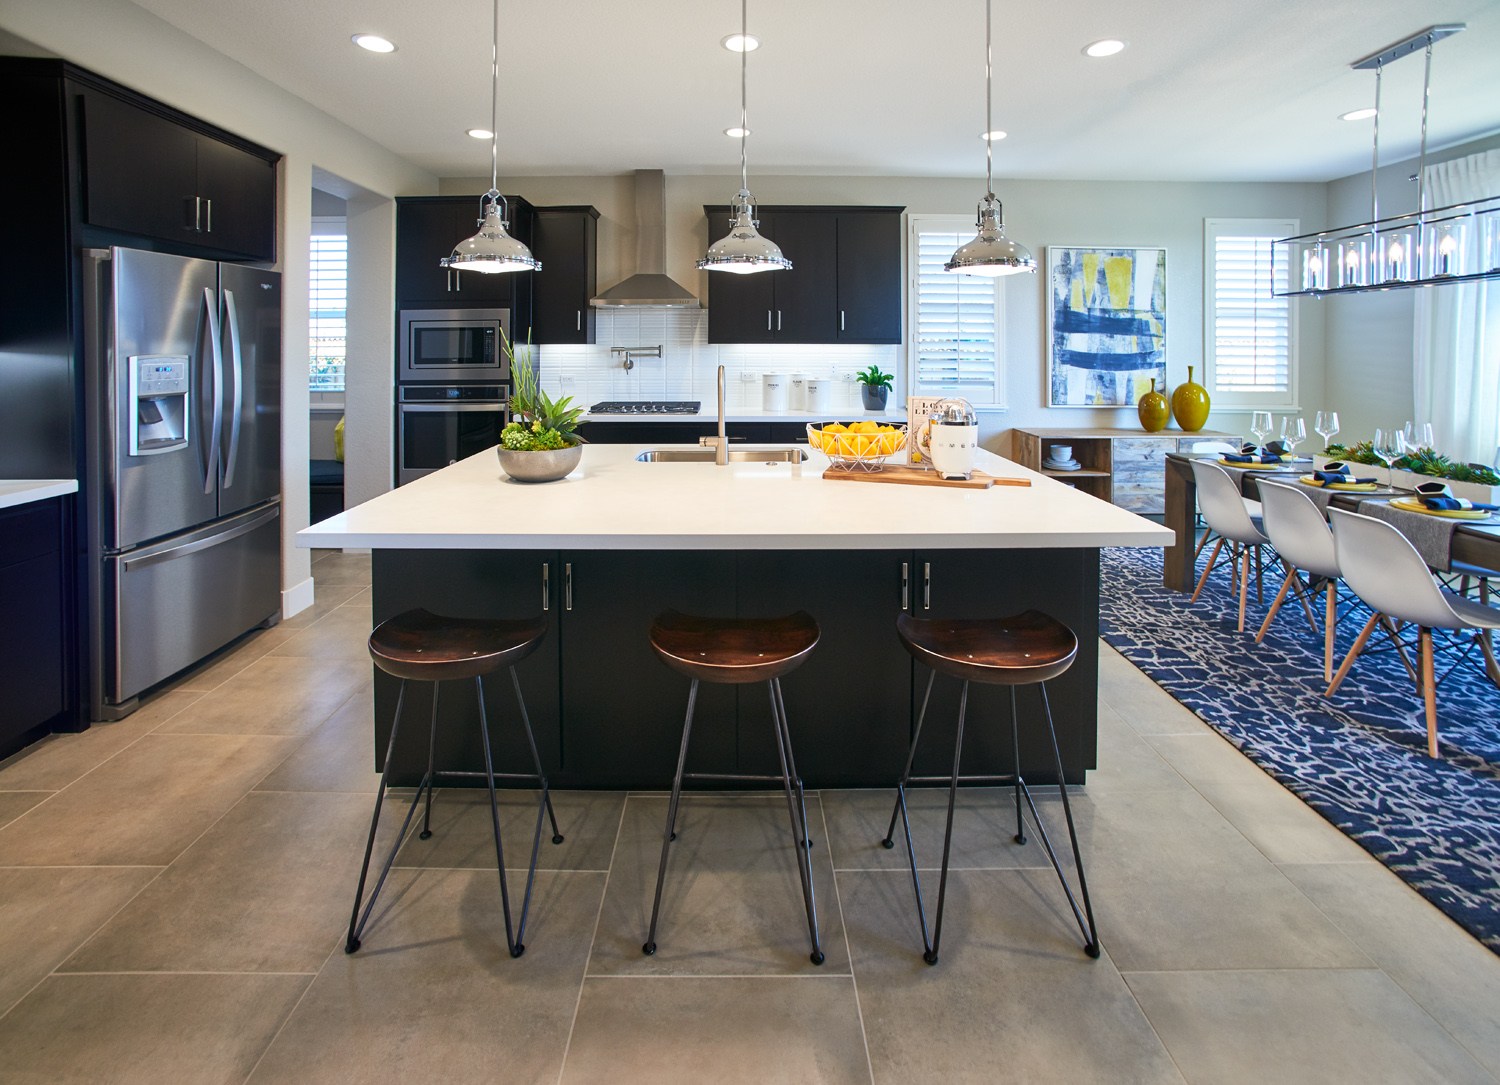 An open concept kitchen with dark cabinetry